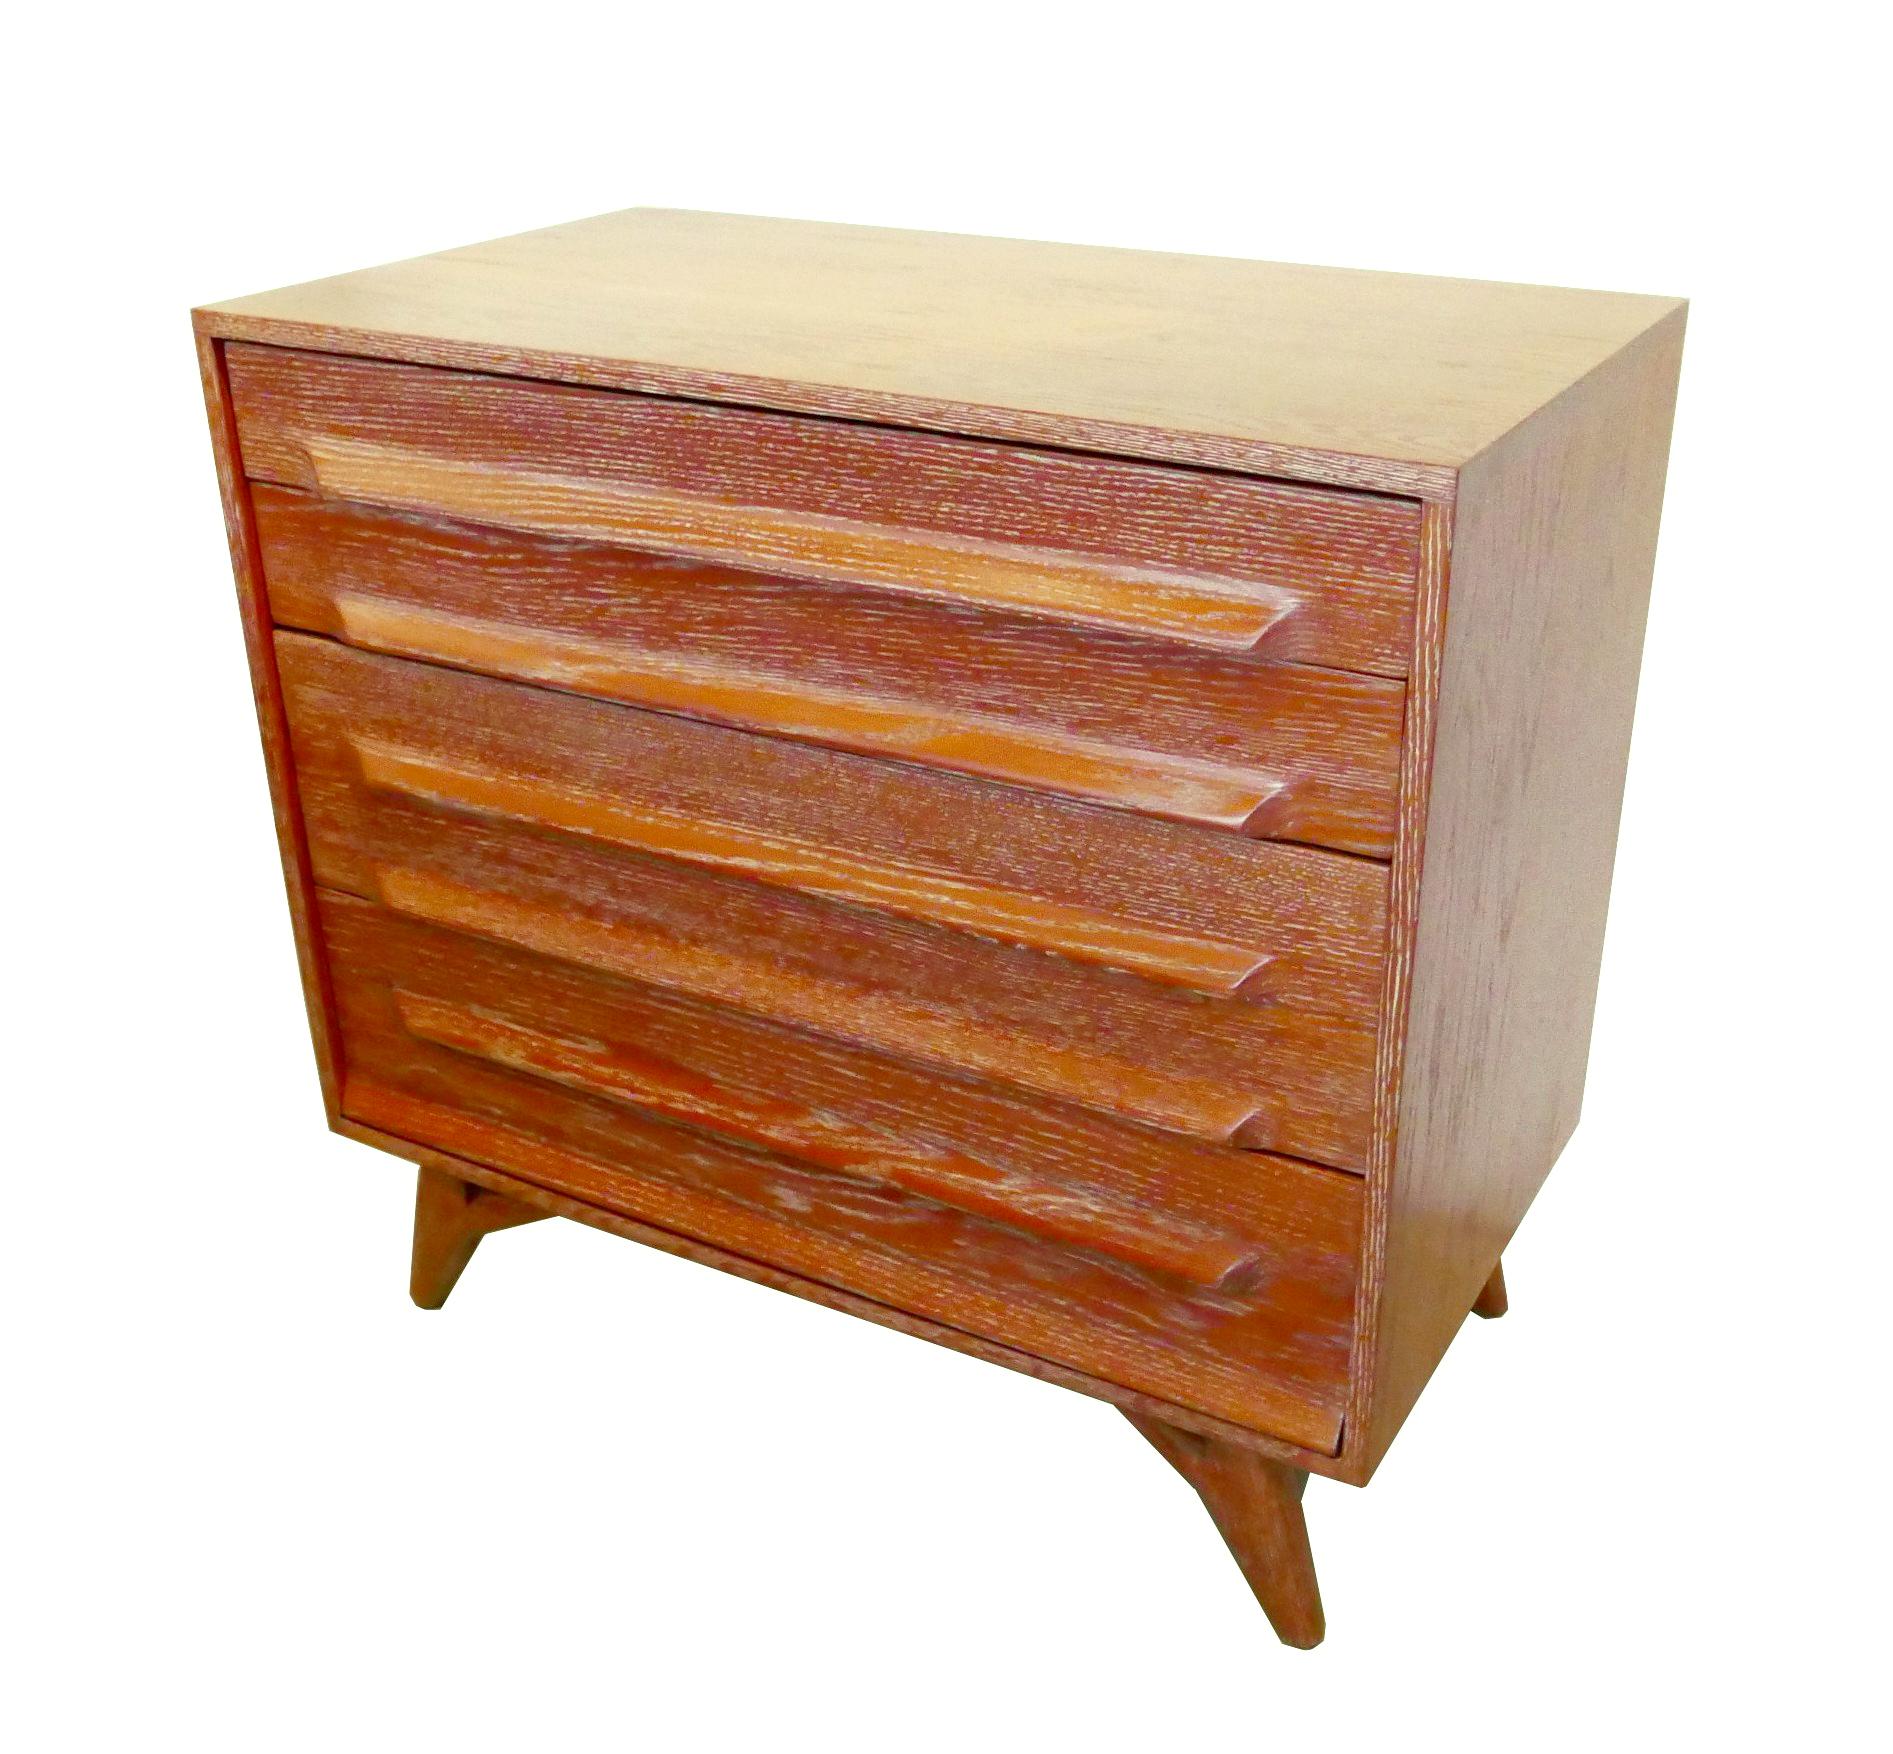 American modern four drawer chest, designed by Jack Van der Molen, Americana Casual Line by Jamestown Lounge. This suite includes a dresser, another smaller dresser and a pair of credenza.